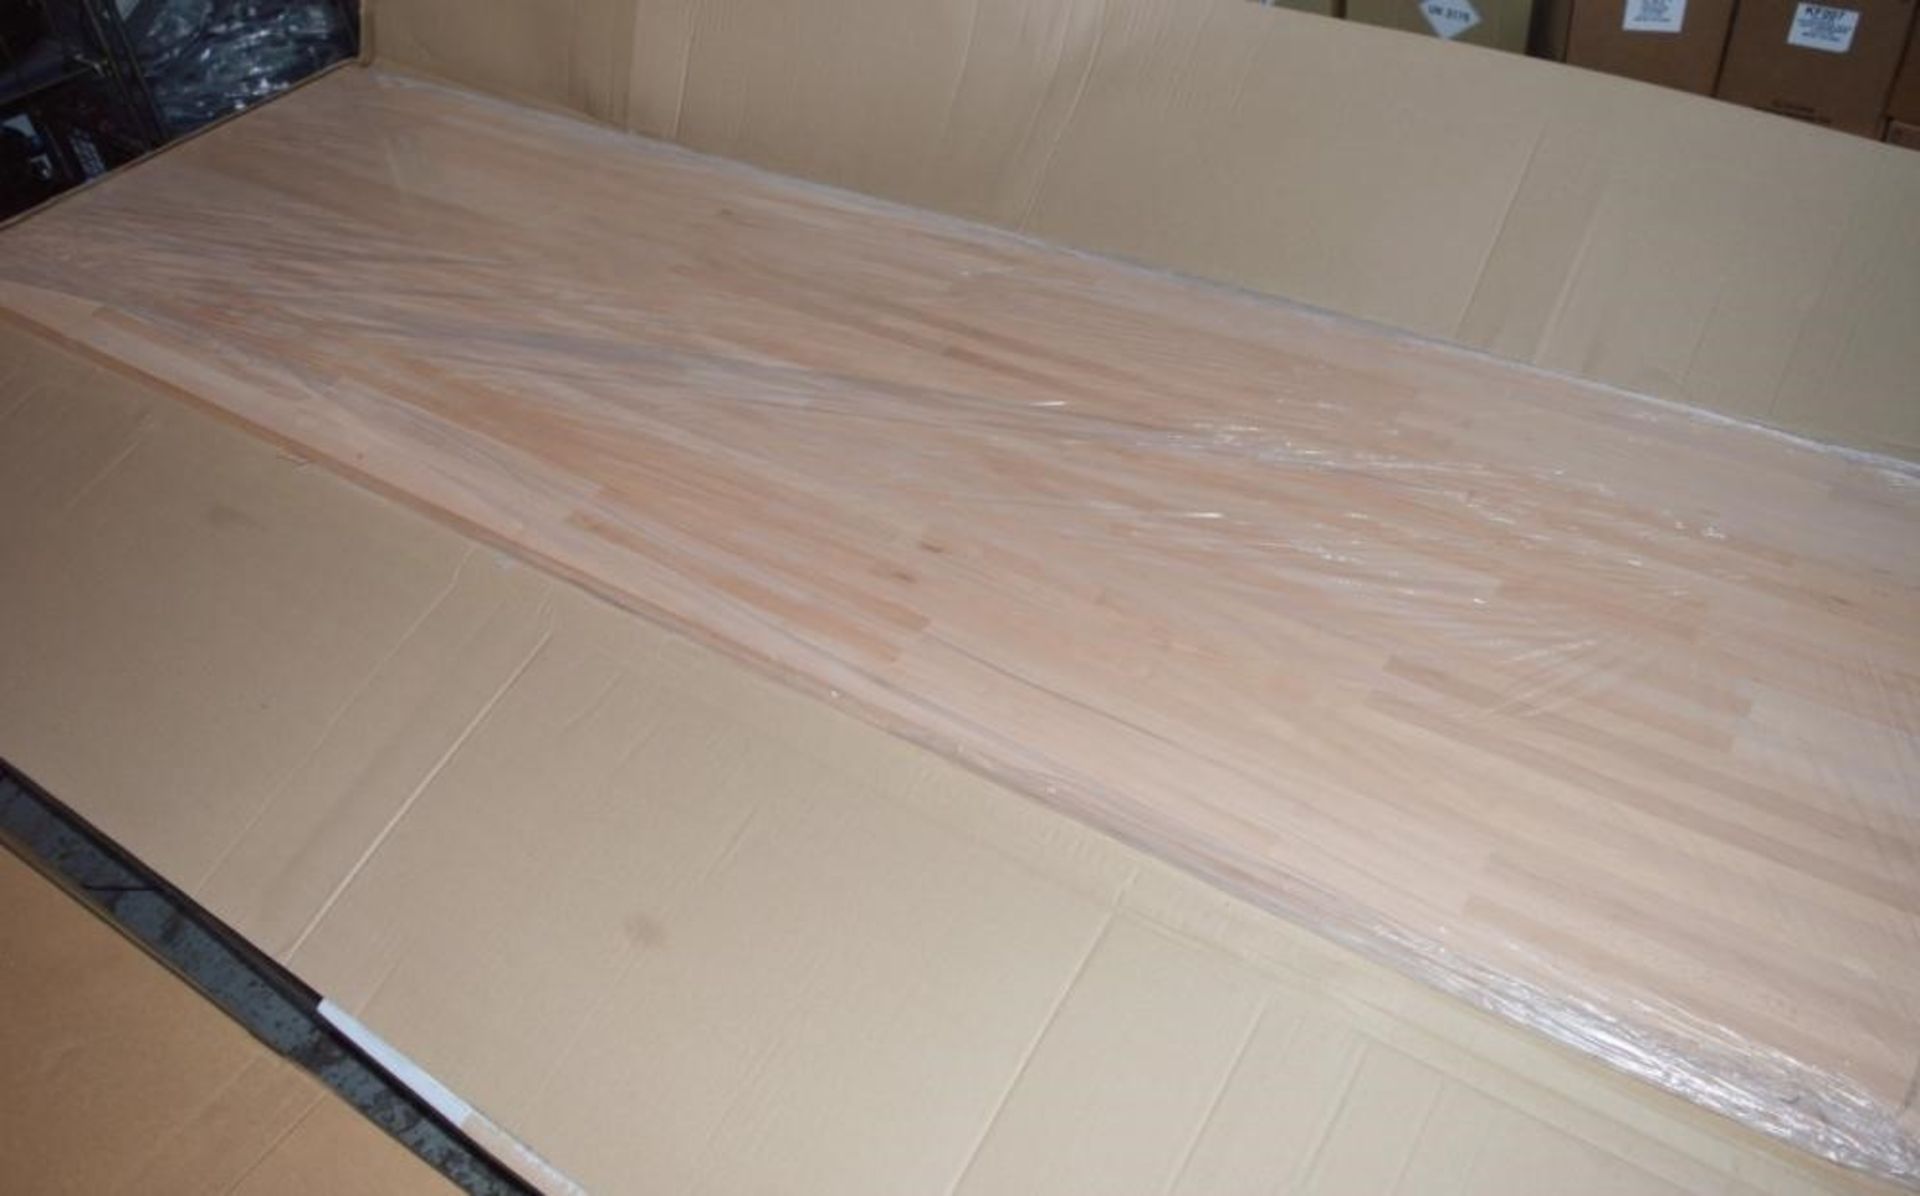 1 x Solid Wood Kitchen Worktop - PRIME BEECH - First Grade Finger Jointed Kitchen Worktop - Size: - Image 3 of 5